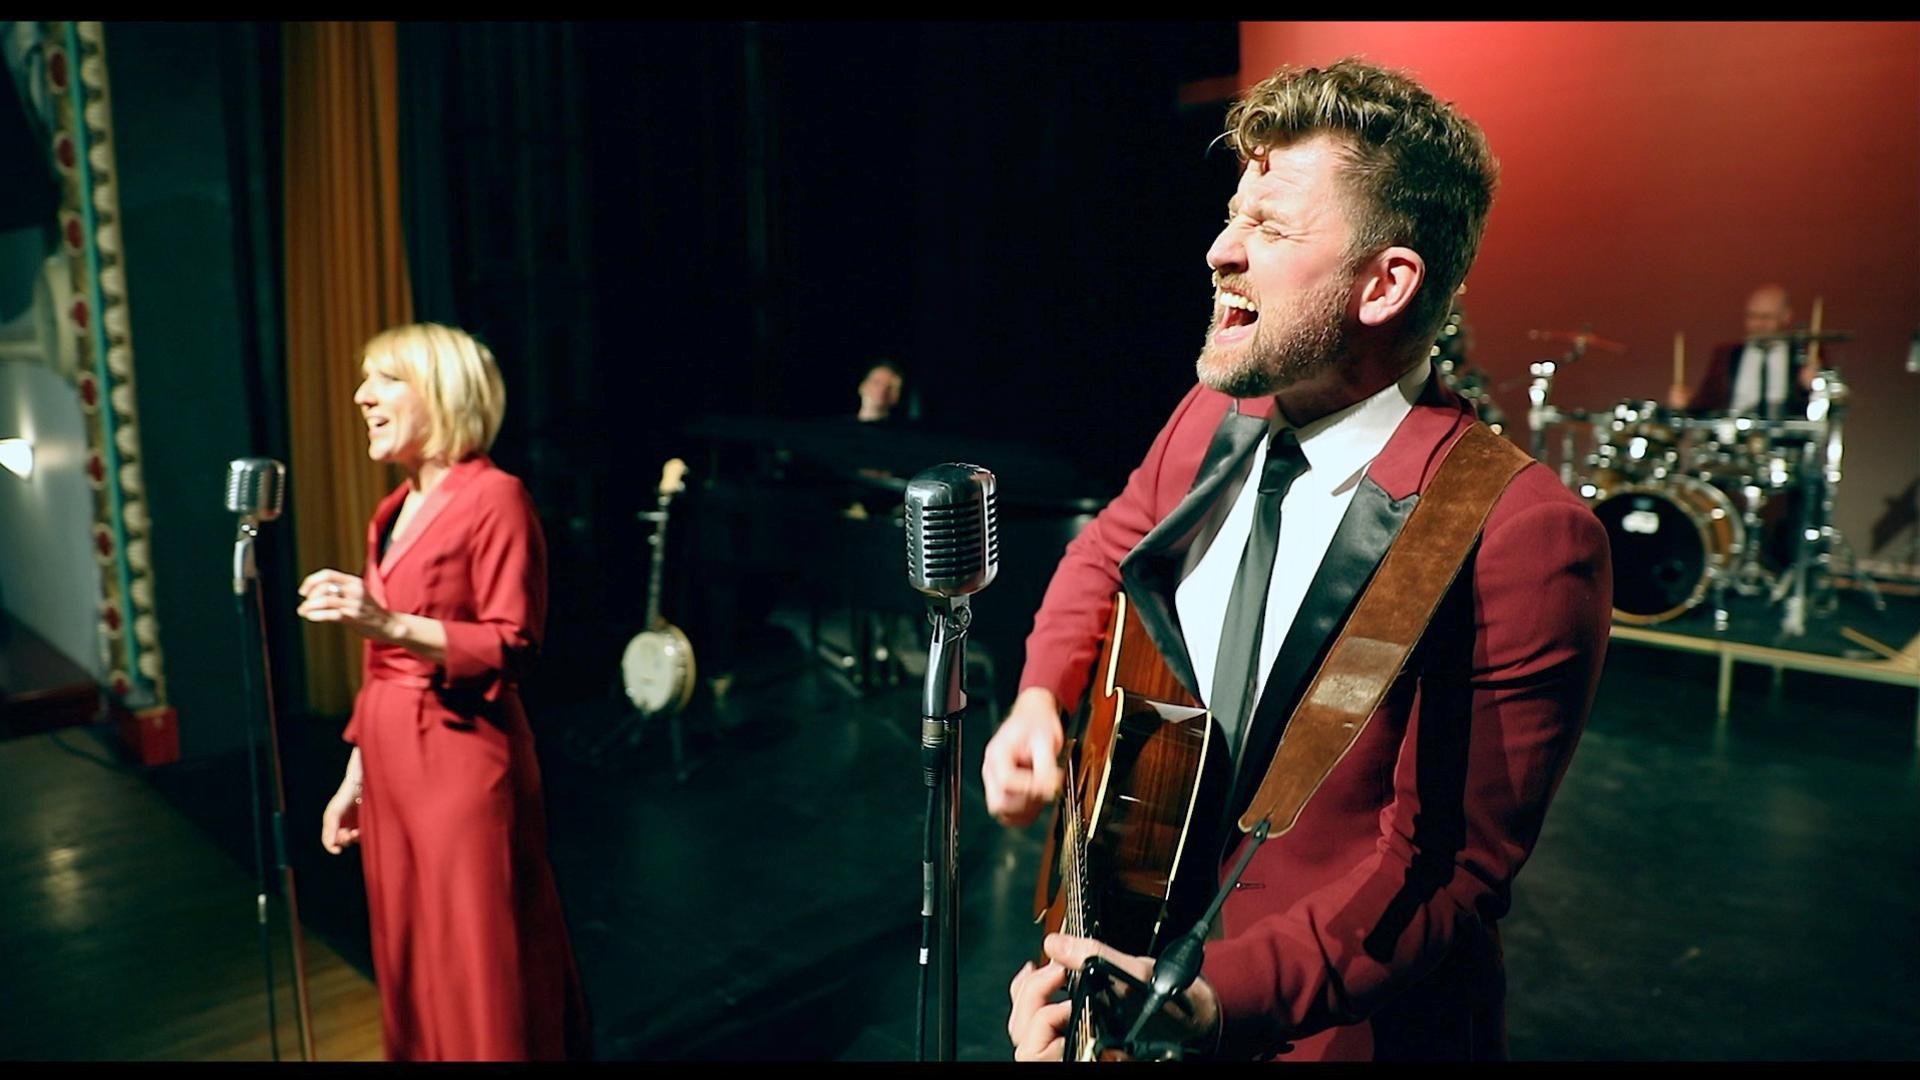 Two singers dressed in red, one playing a guitar